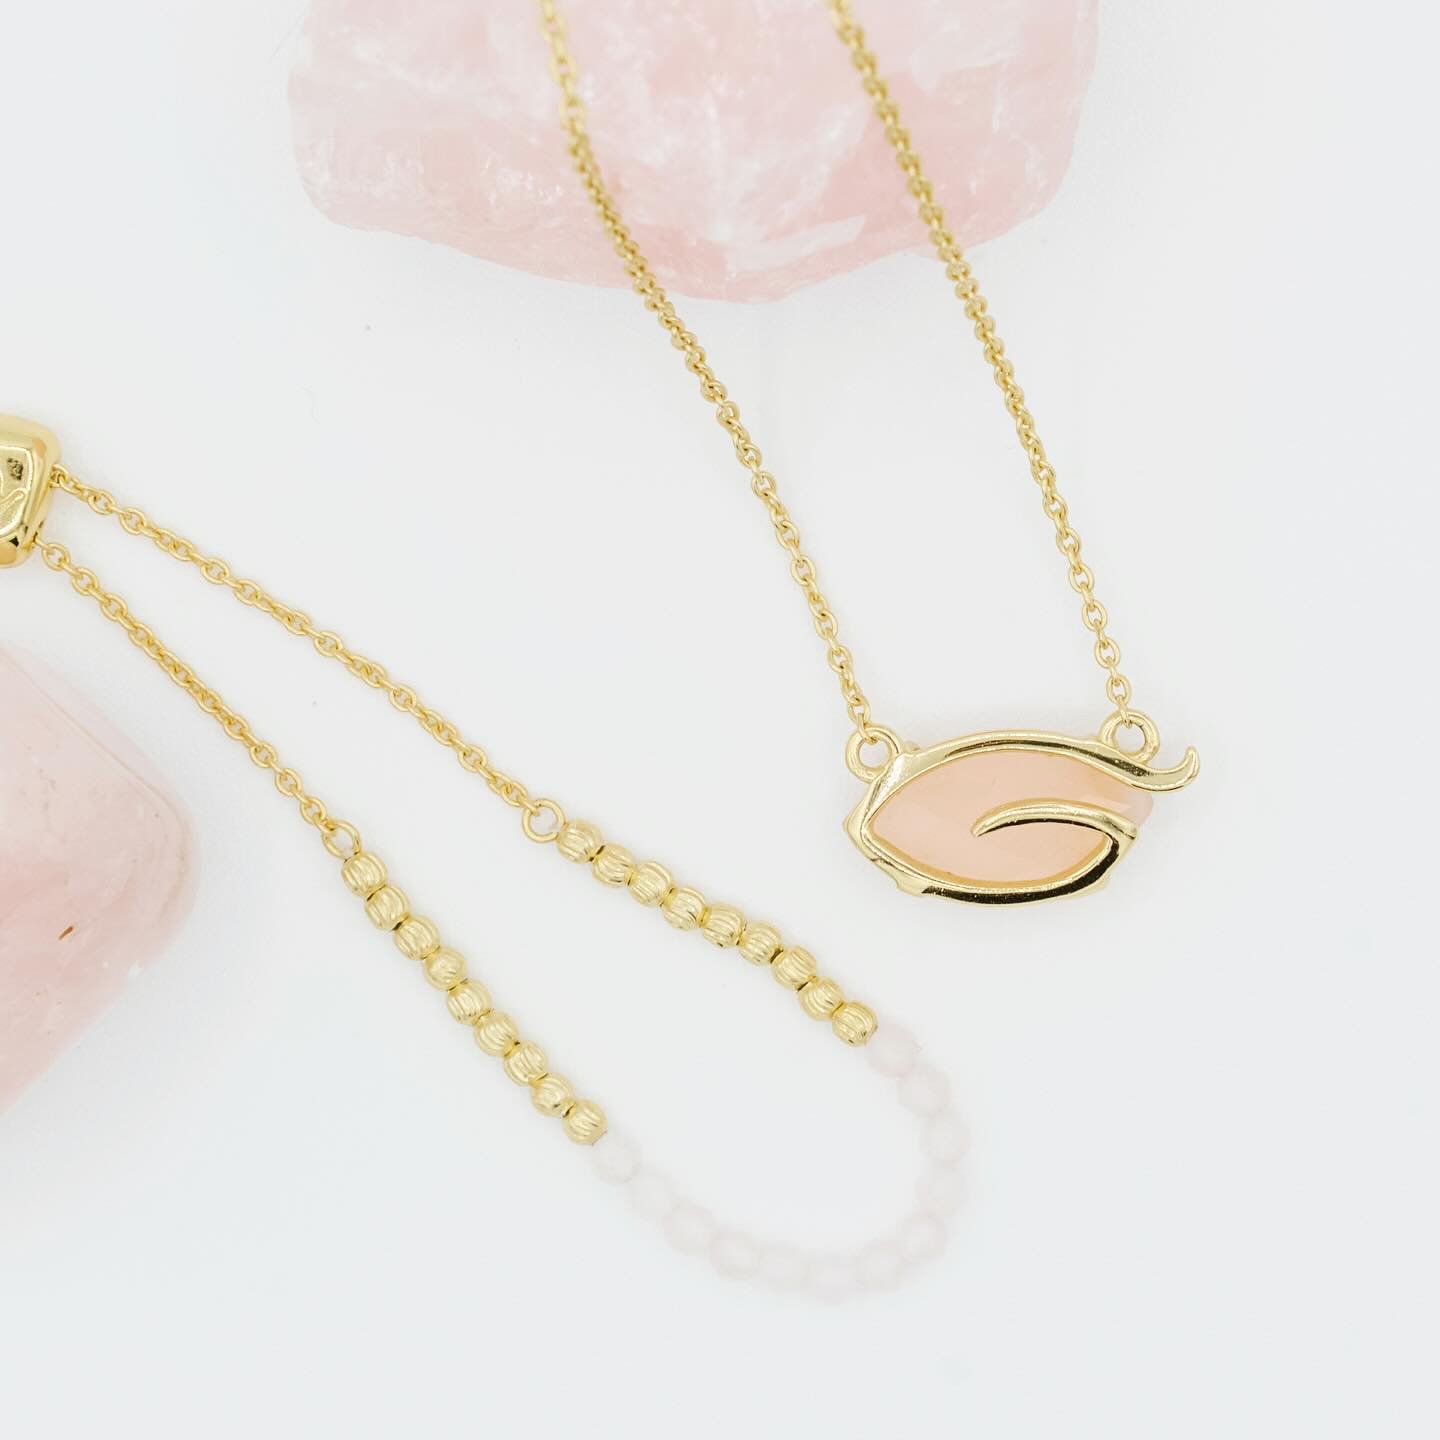 Elevate your gifting game with the timeless elegance of Kimberly James Jewelry&rsquo;s pink chalcedony and rose quartz jewelry! Beyond their stunning hues, these stones carry profound meanings that make them perfect gifts for any occasion.

Symbolizi